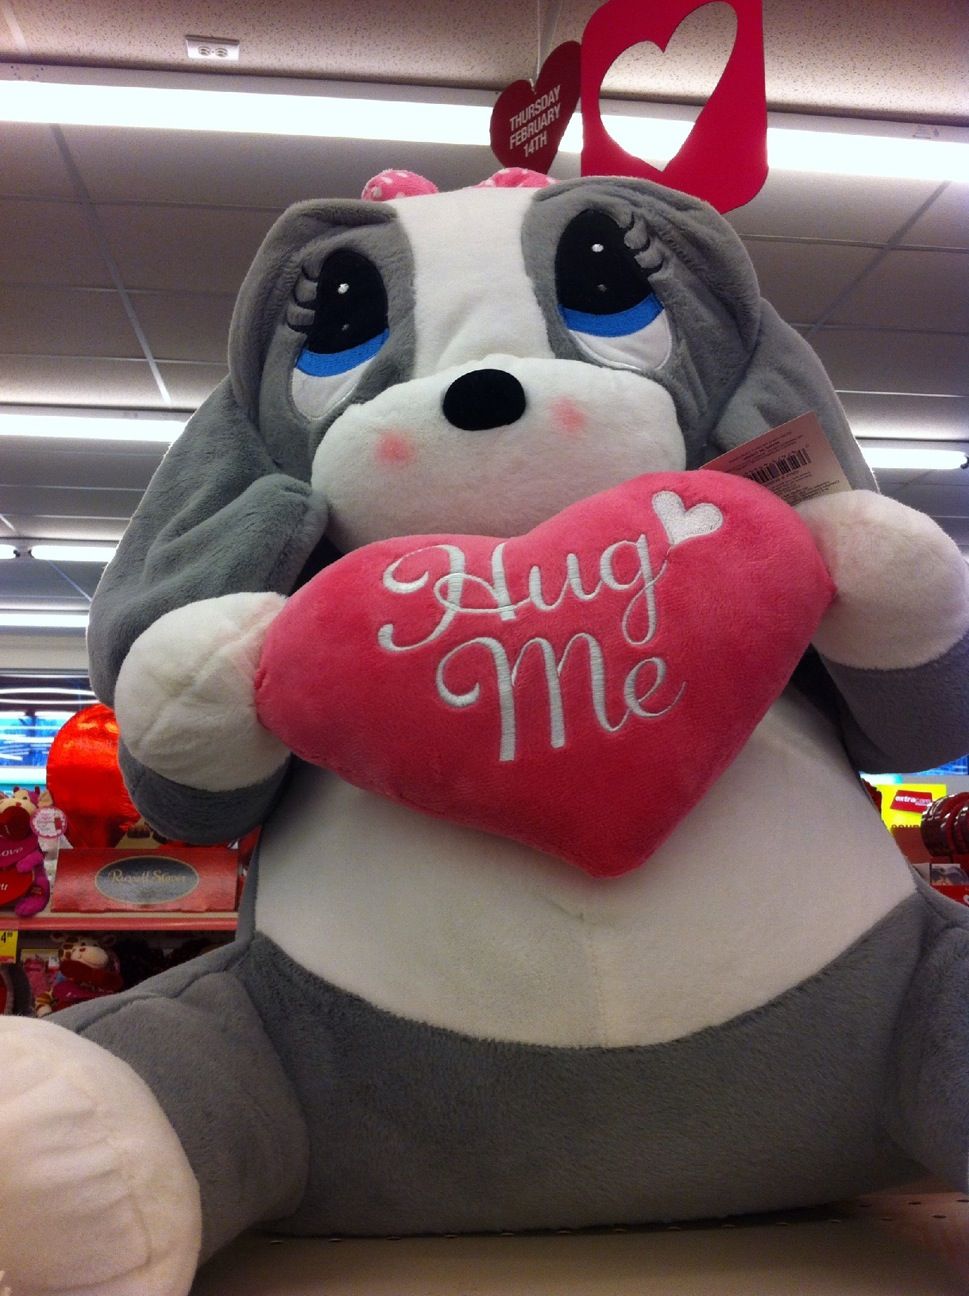 I so want this for Valentine's Day